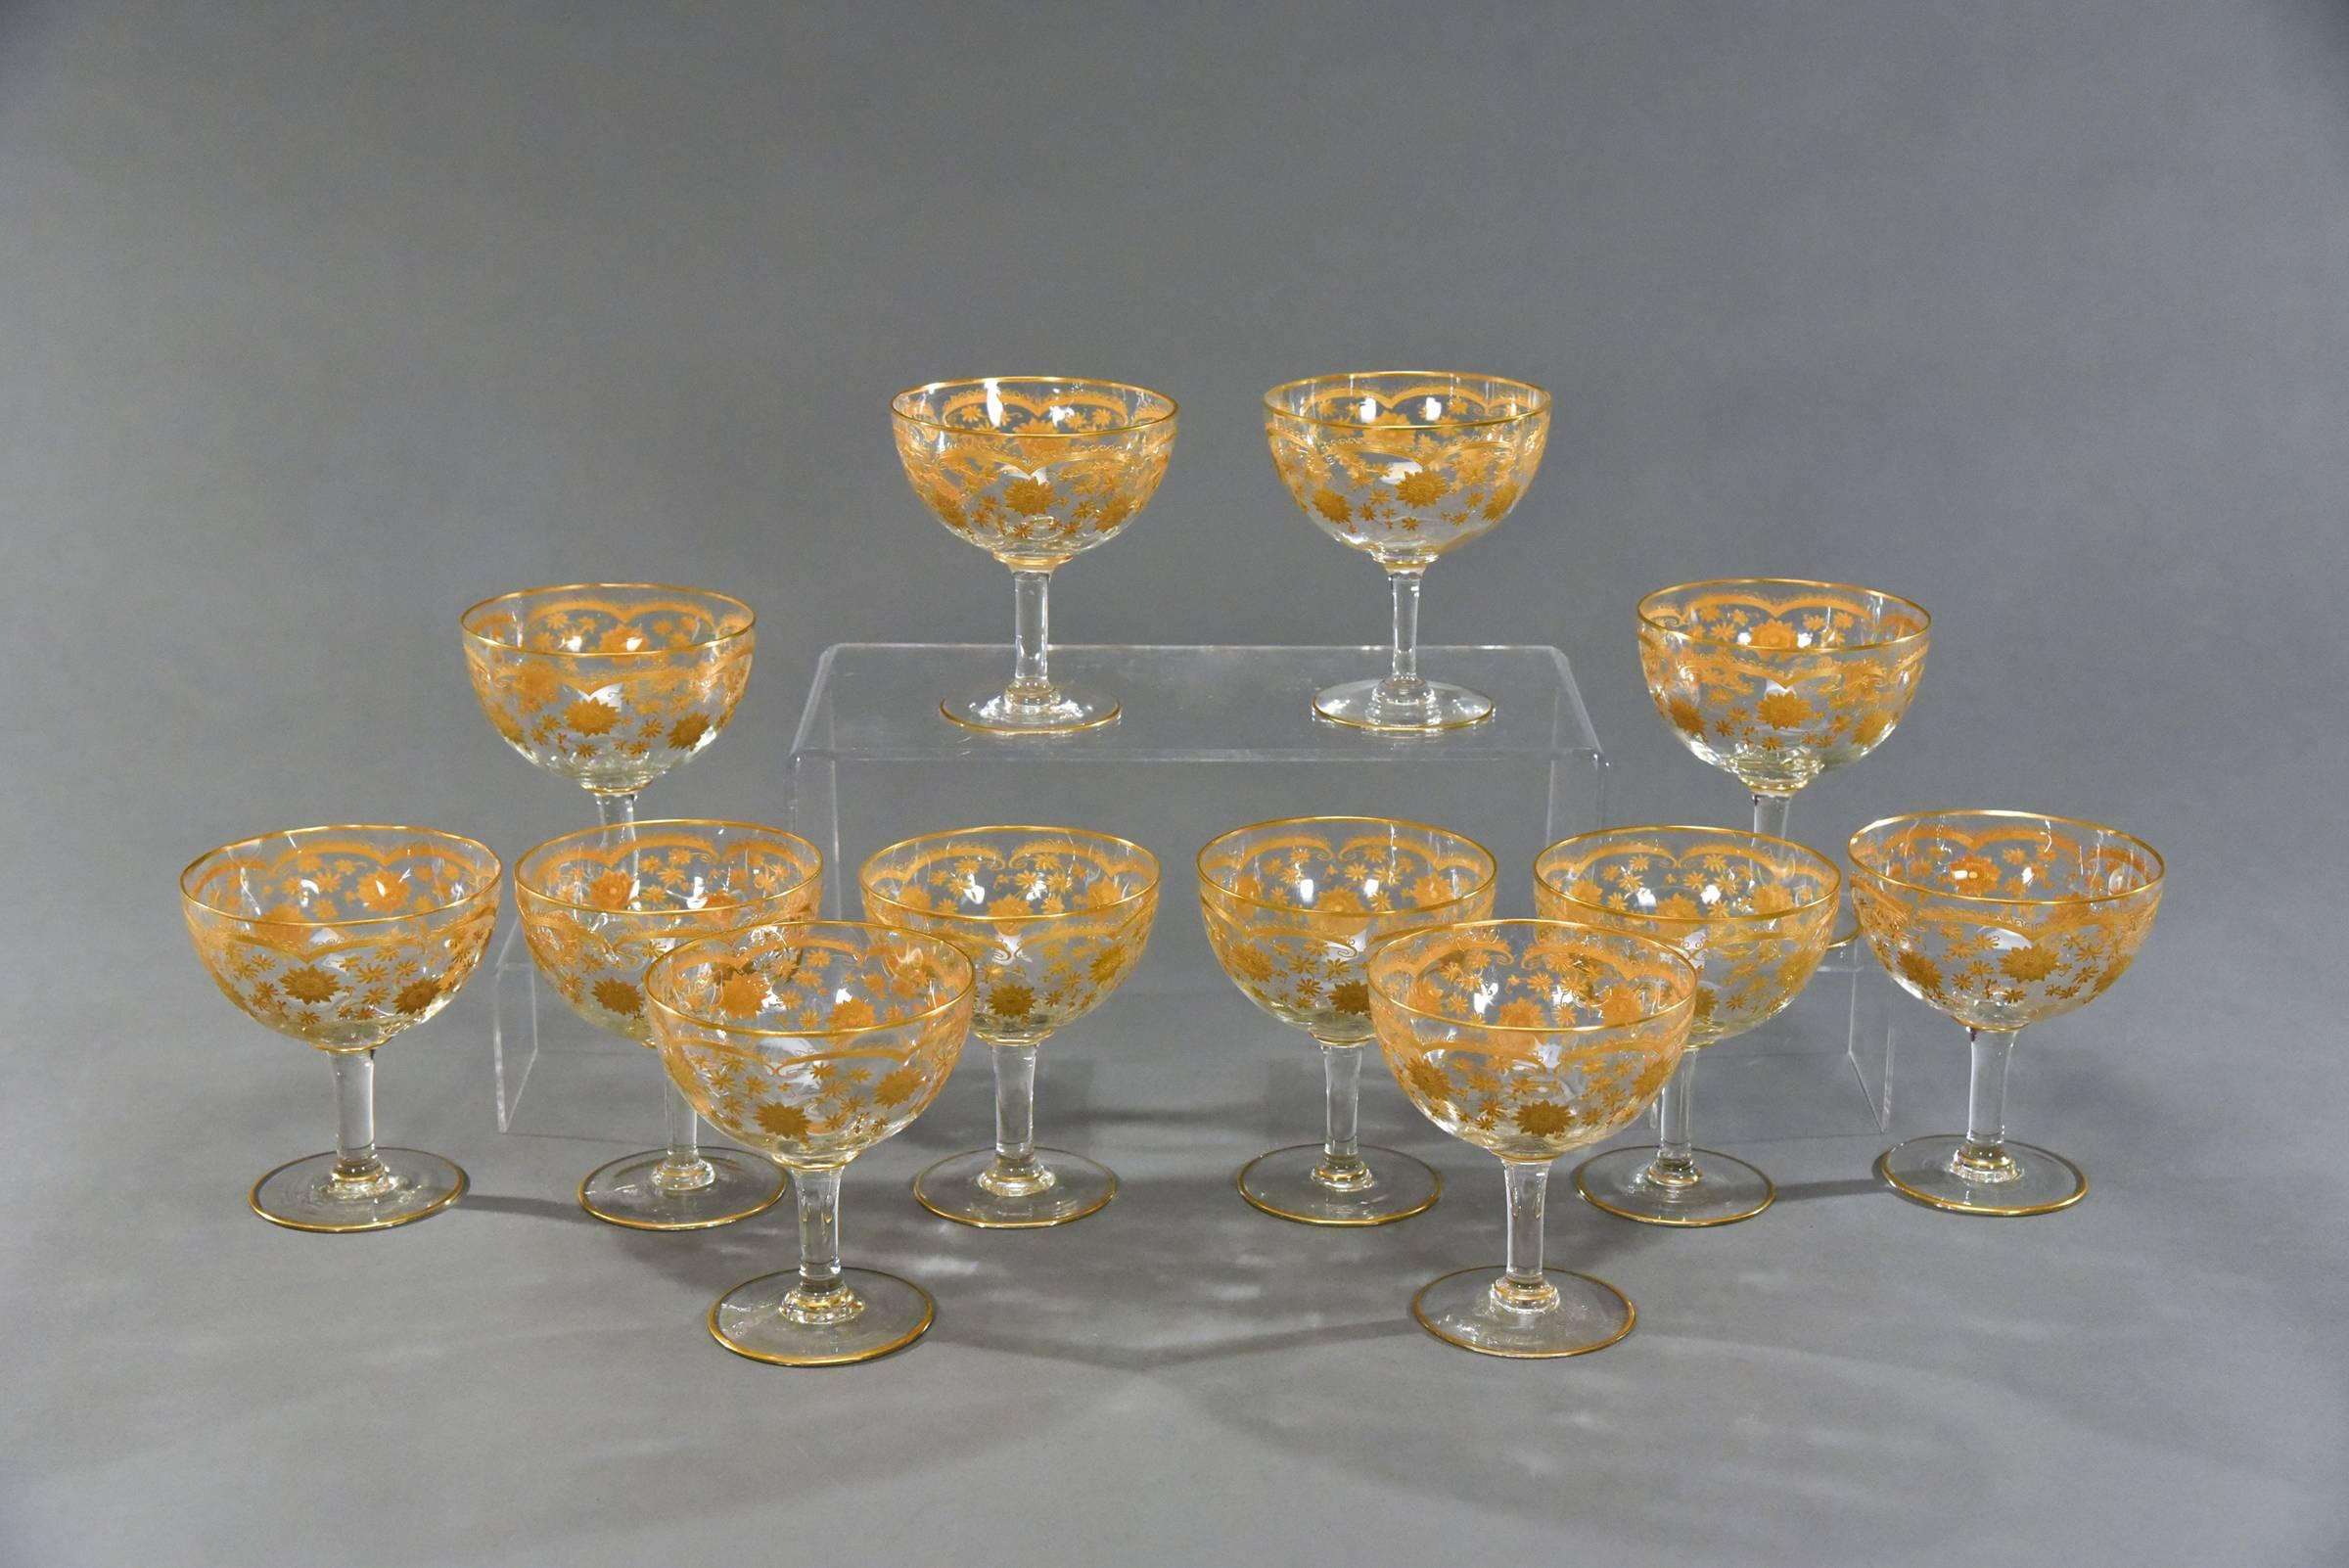 A complete set of 12 handblown crystal large footed compotes or 